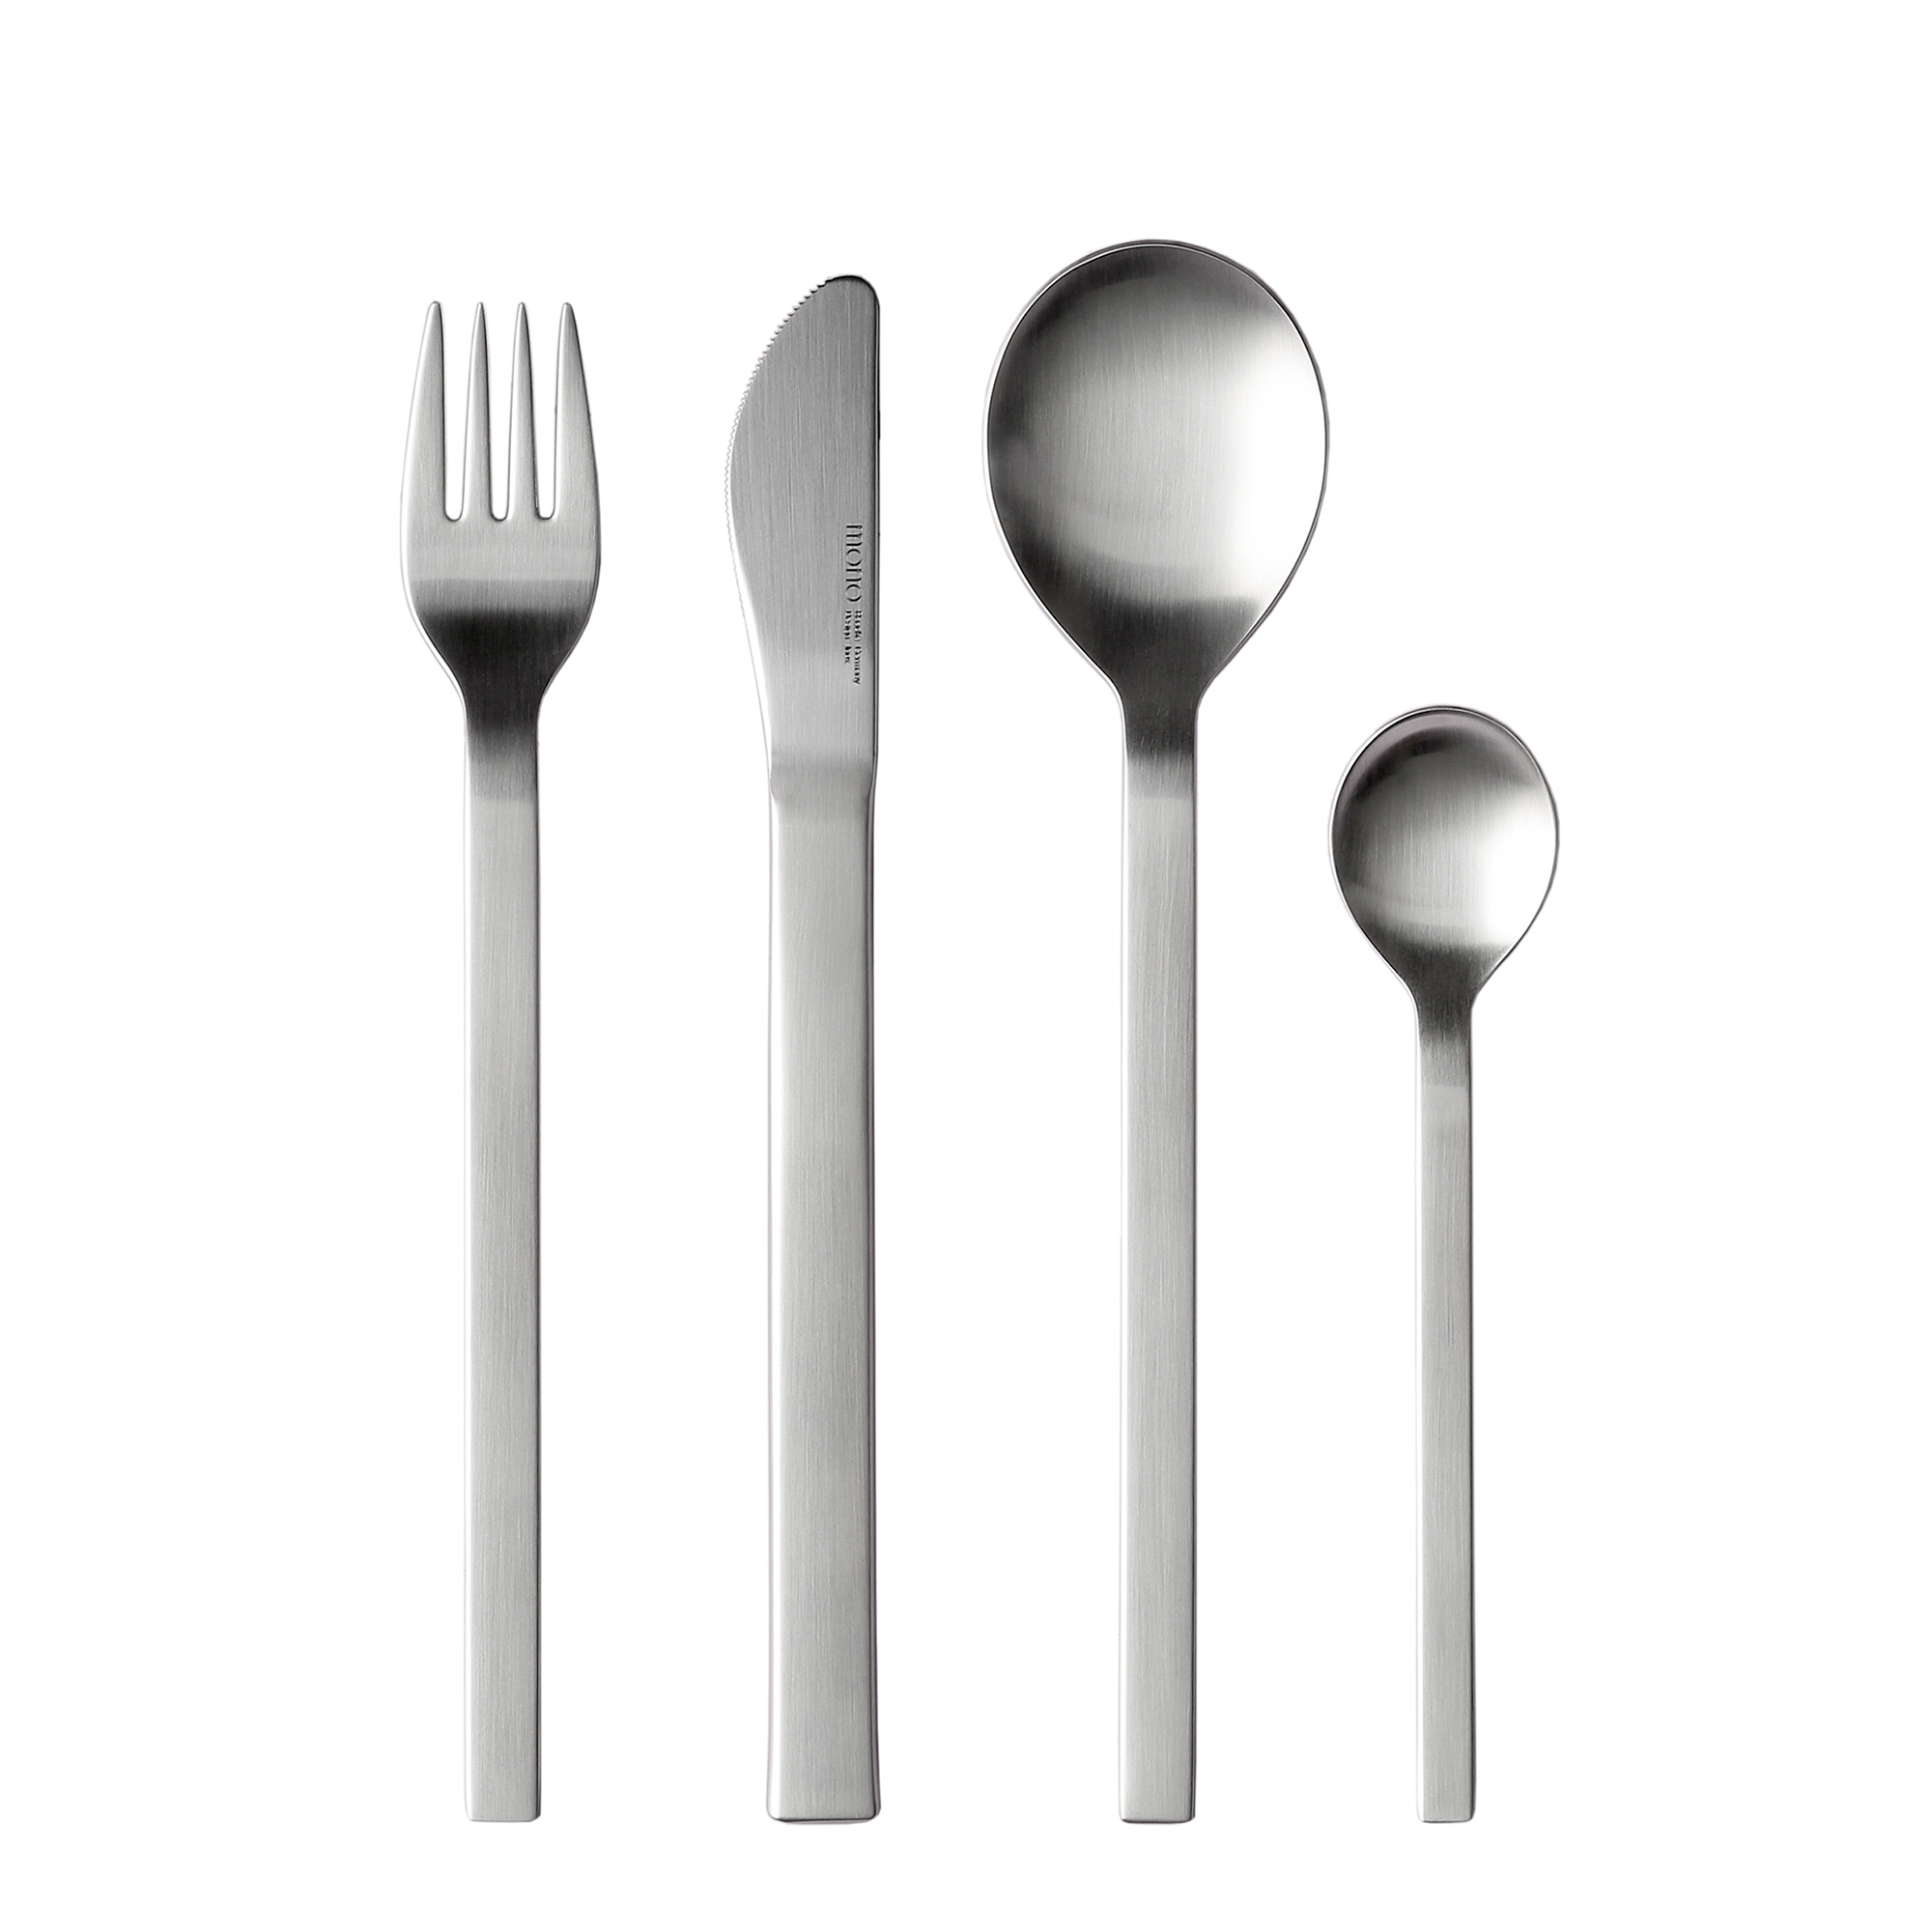 mono-a - Cutlery set, 4 pcs. with short blade